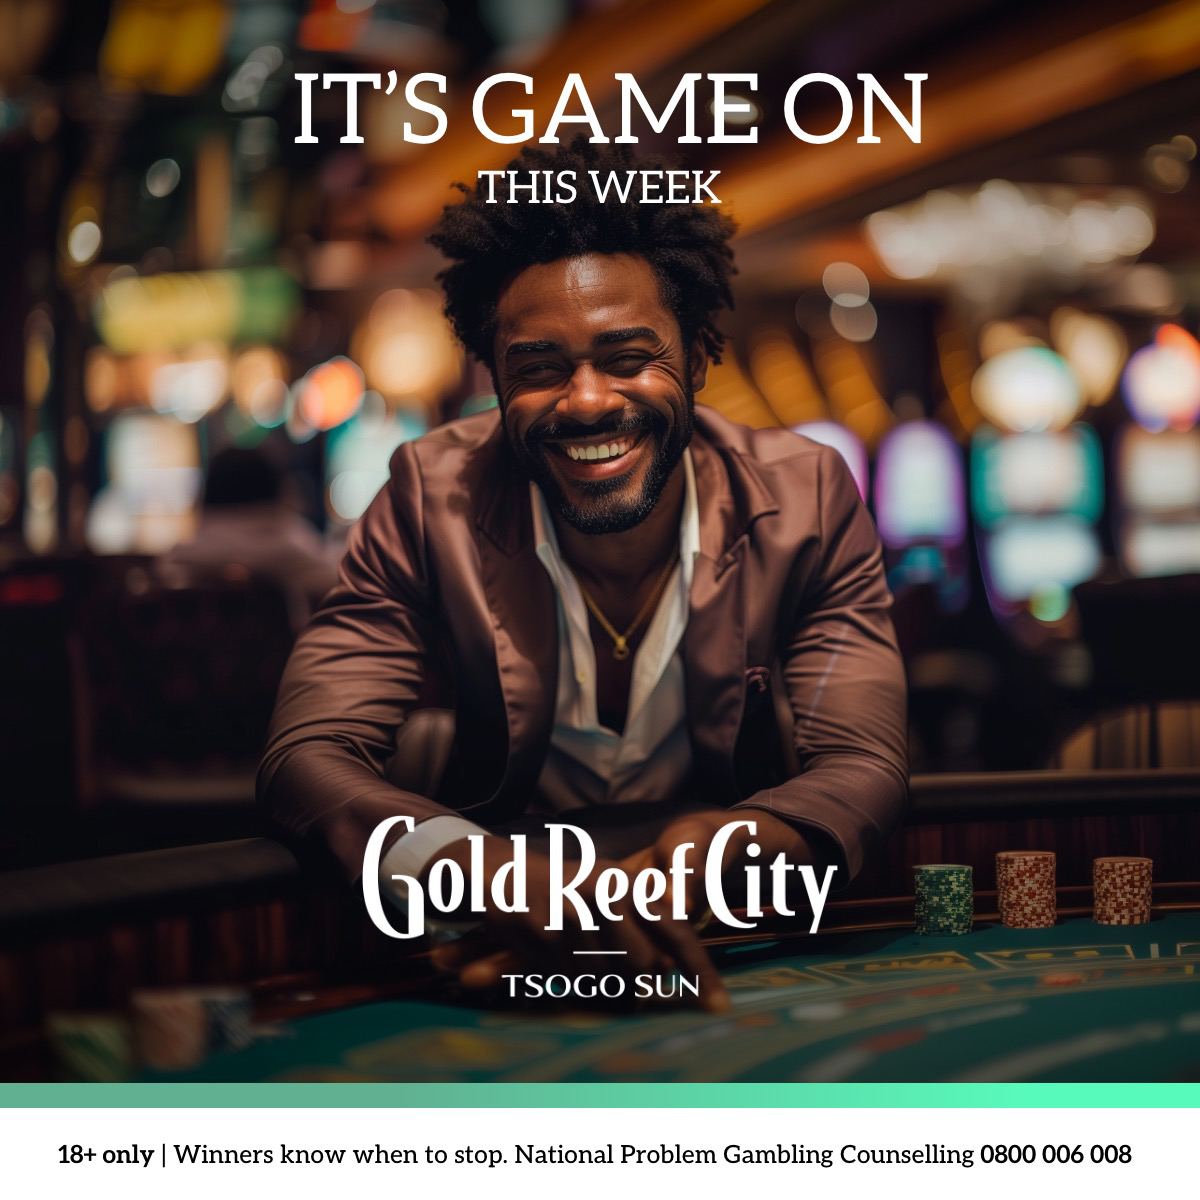 18+| Get your Rewards card ready & let’s play. WIN big with Gold Reef City promotions, like Dream Chaser, or try something new at Prive with Baccarat. It’s your week to strike it lucky, grab it & play your best hand. Rules & Info goldreefcity.co.za